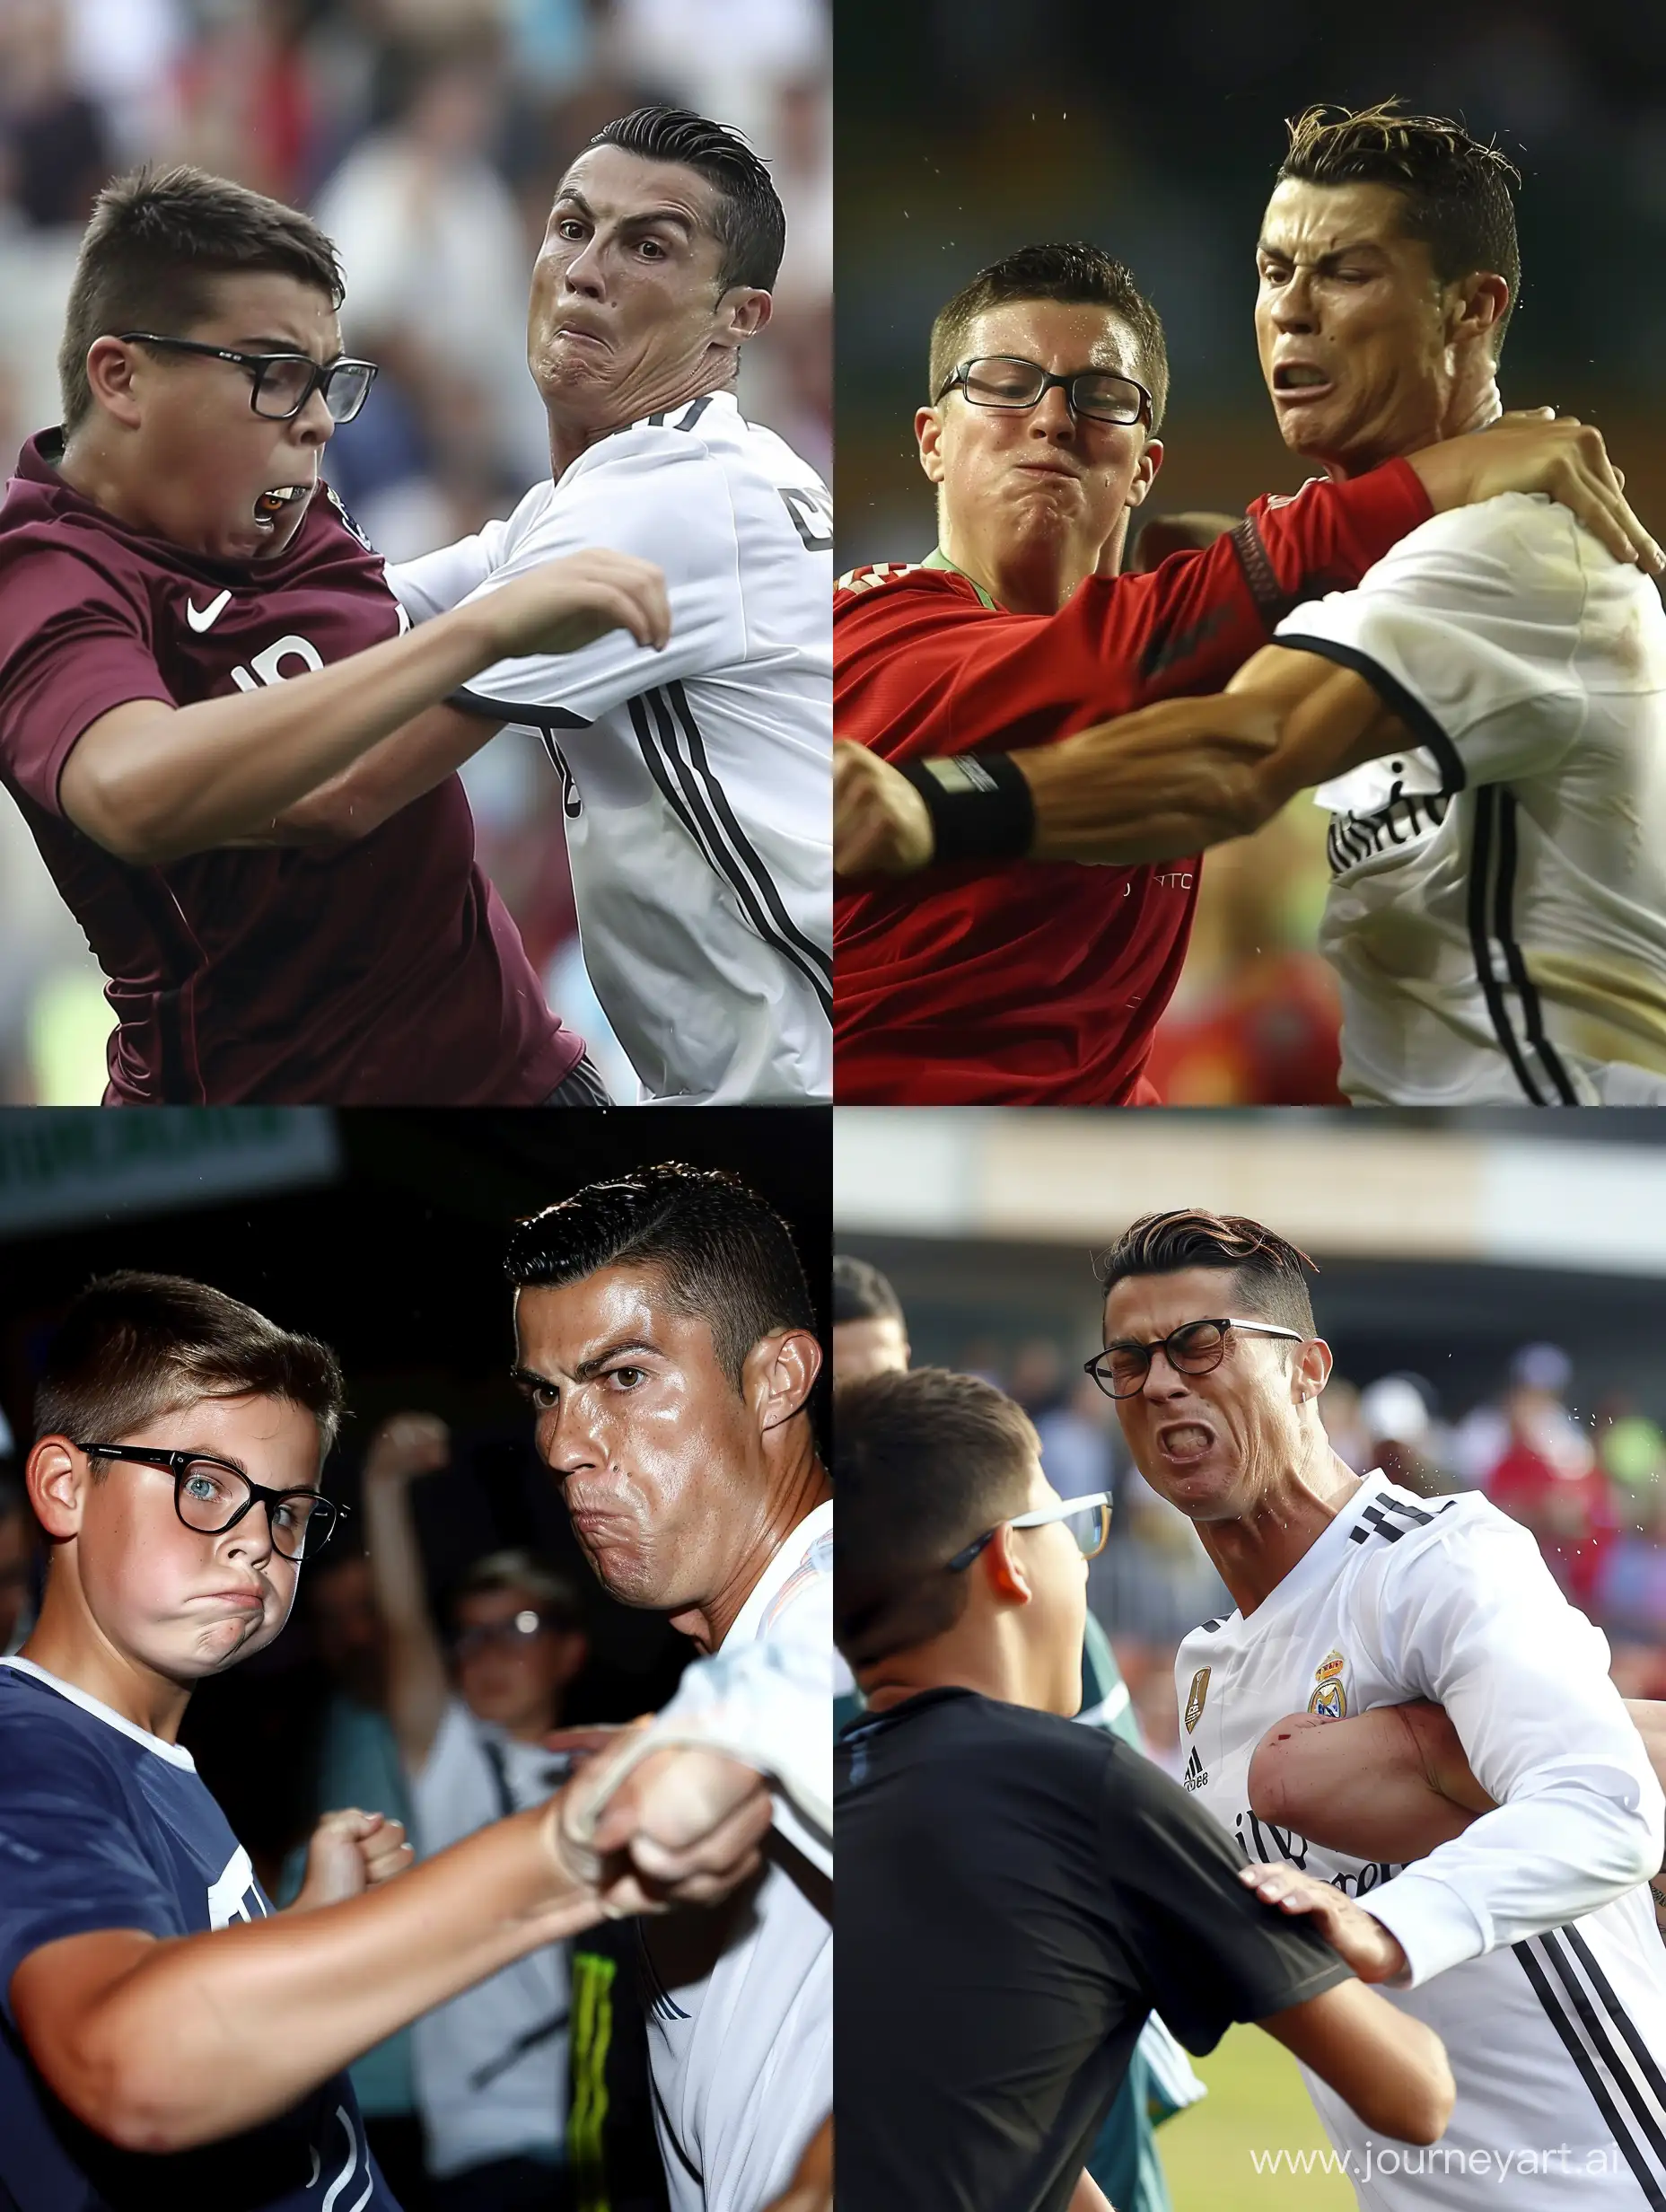 Cristiano Ronaldo punching a fat Italia boy 15 years old with glasses black short hair